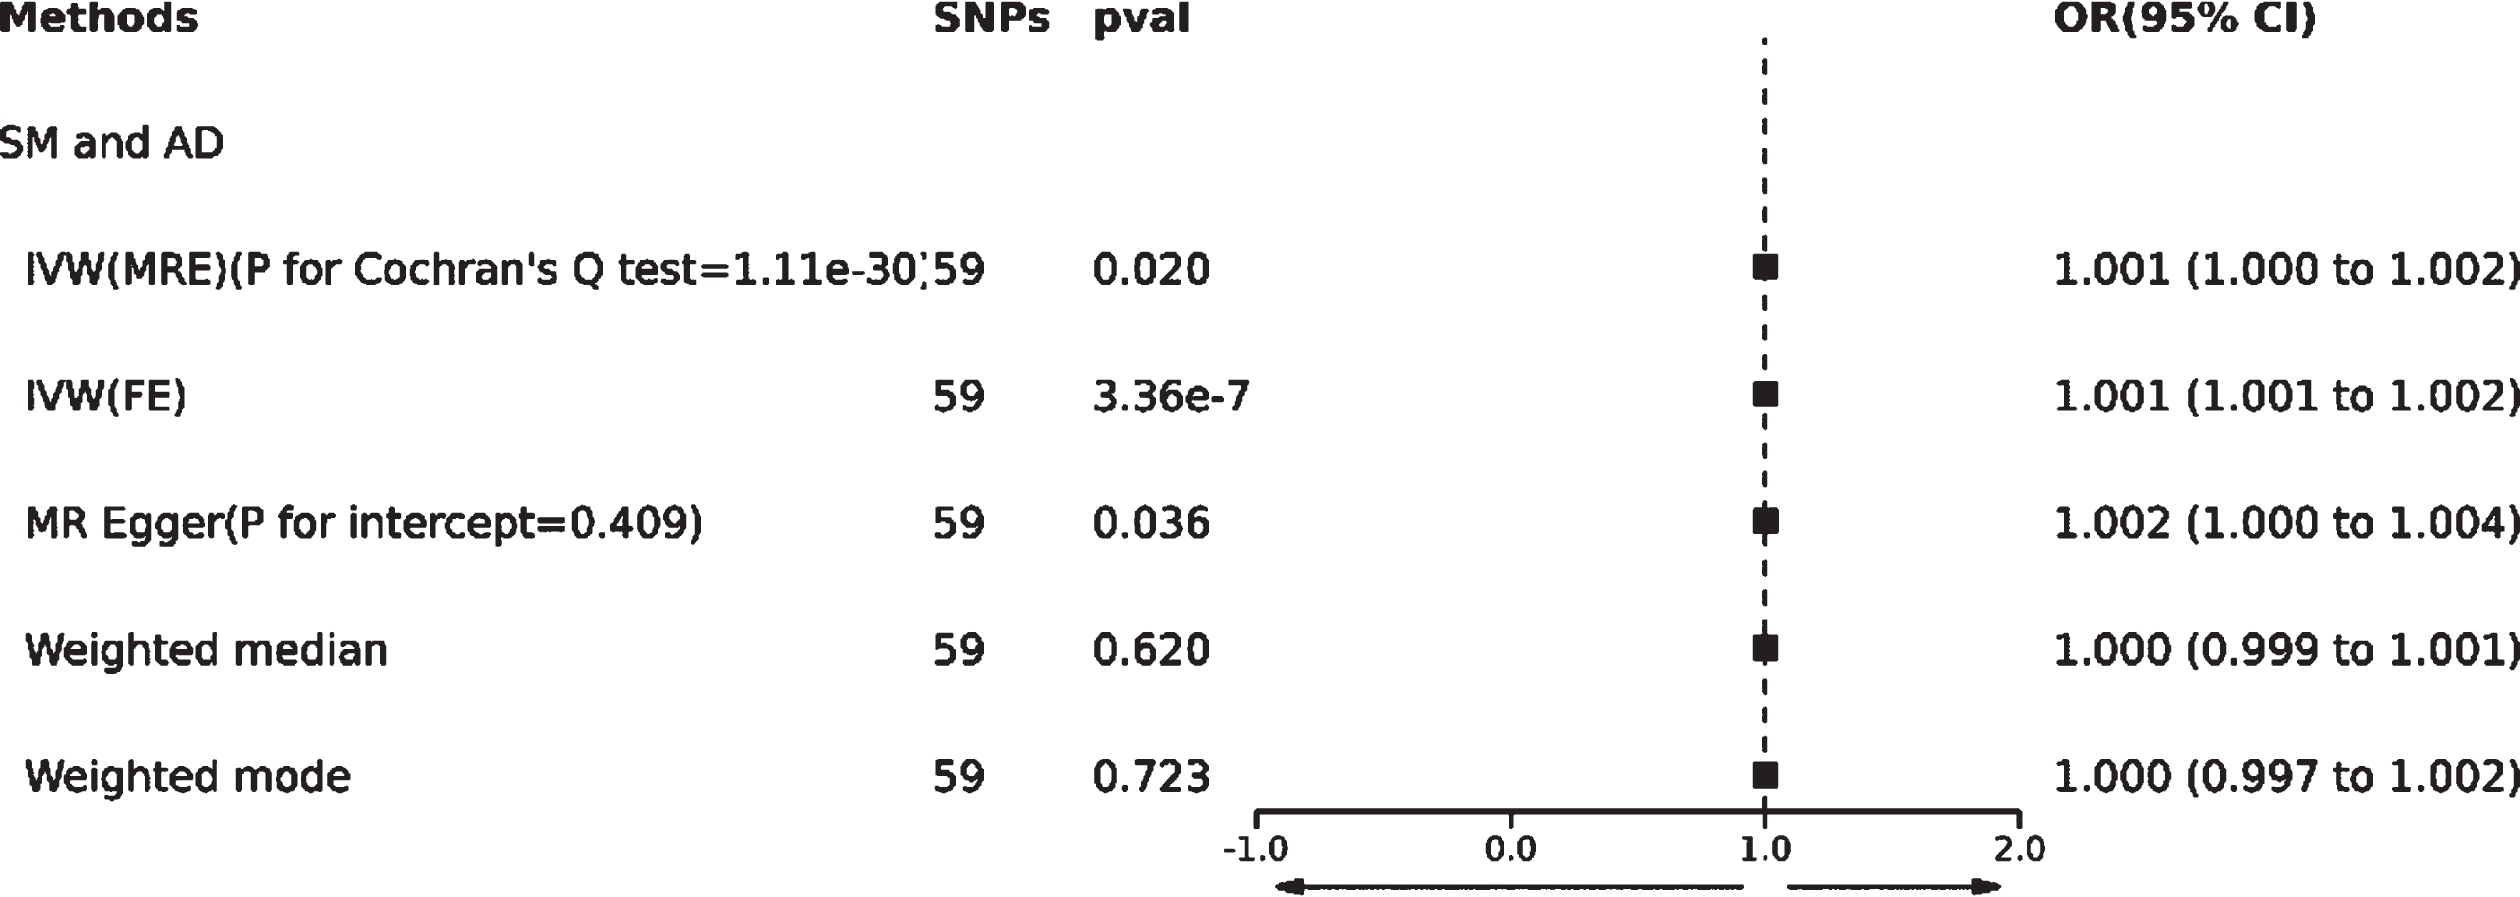 TSMR analysis results of causal relationship between SM and AD.